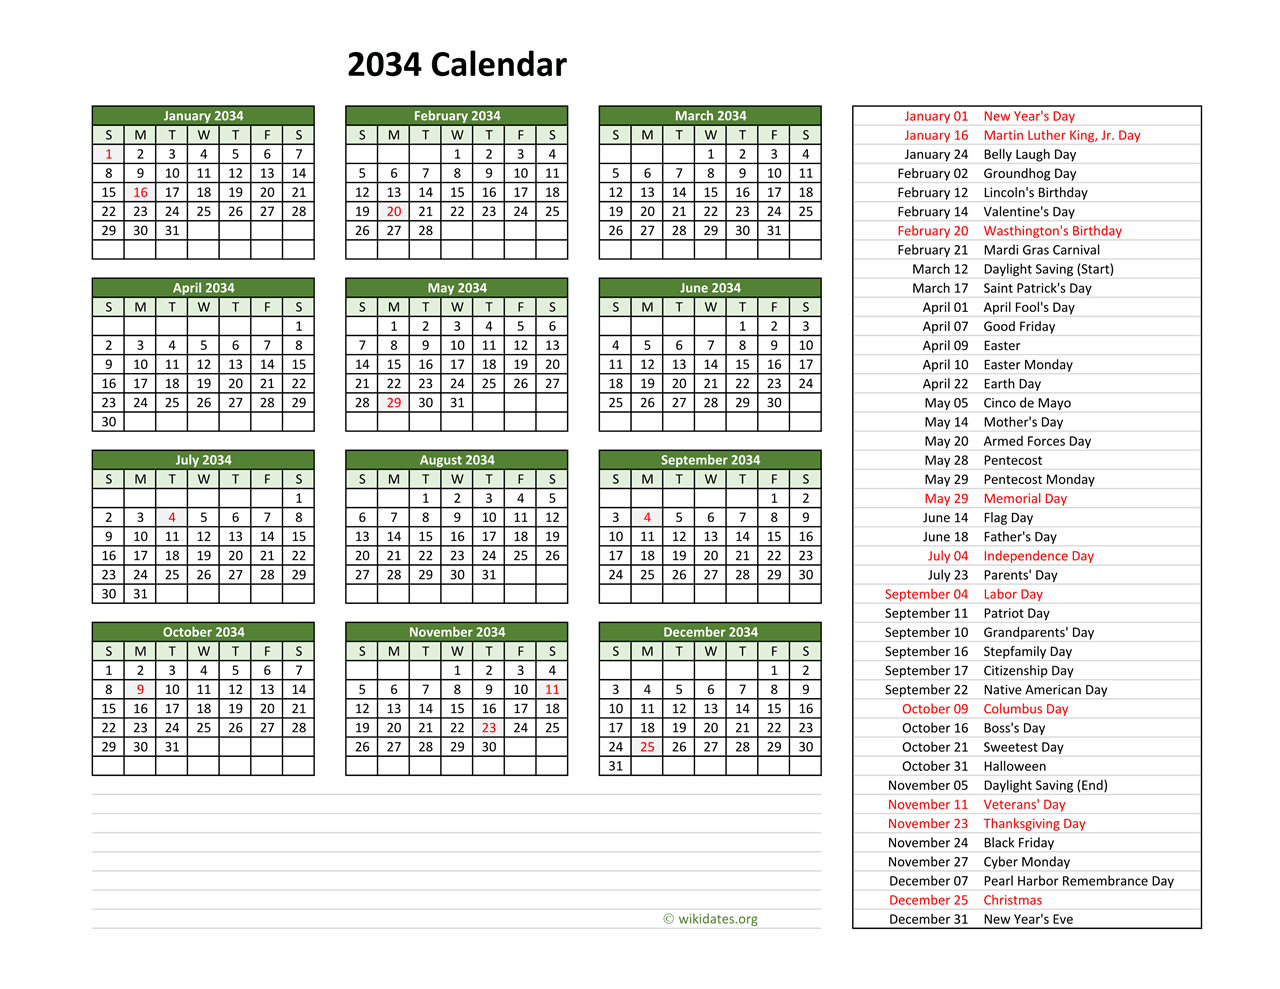 2034 Calendar with US Holidays  WikiDates.org